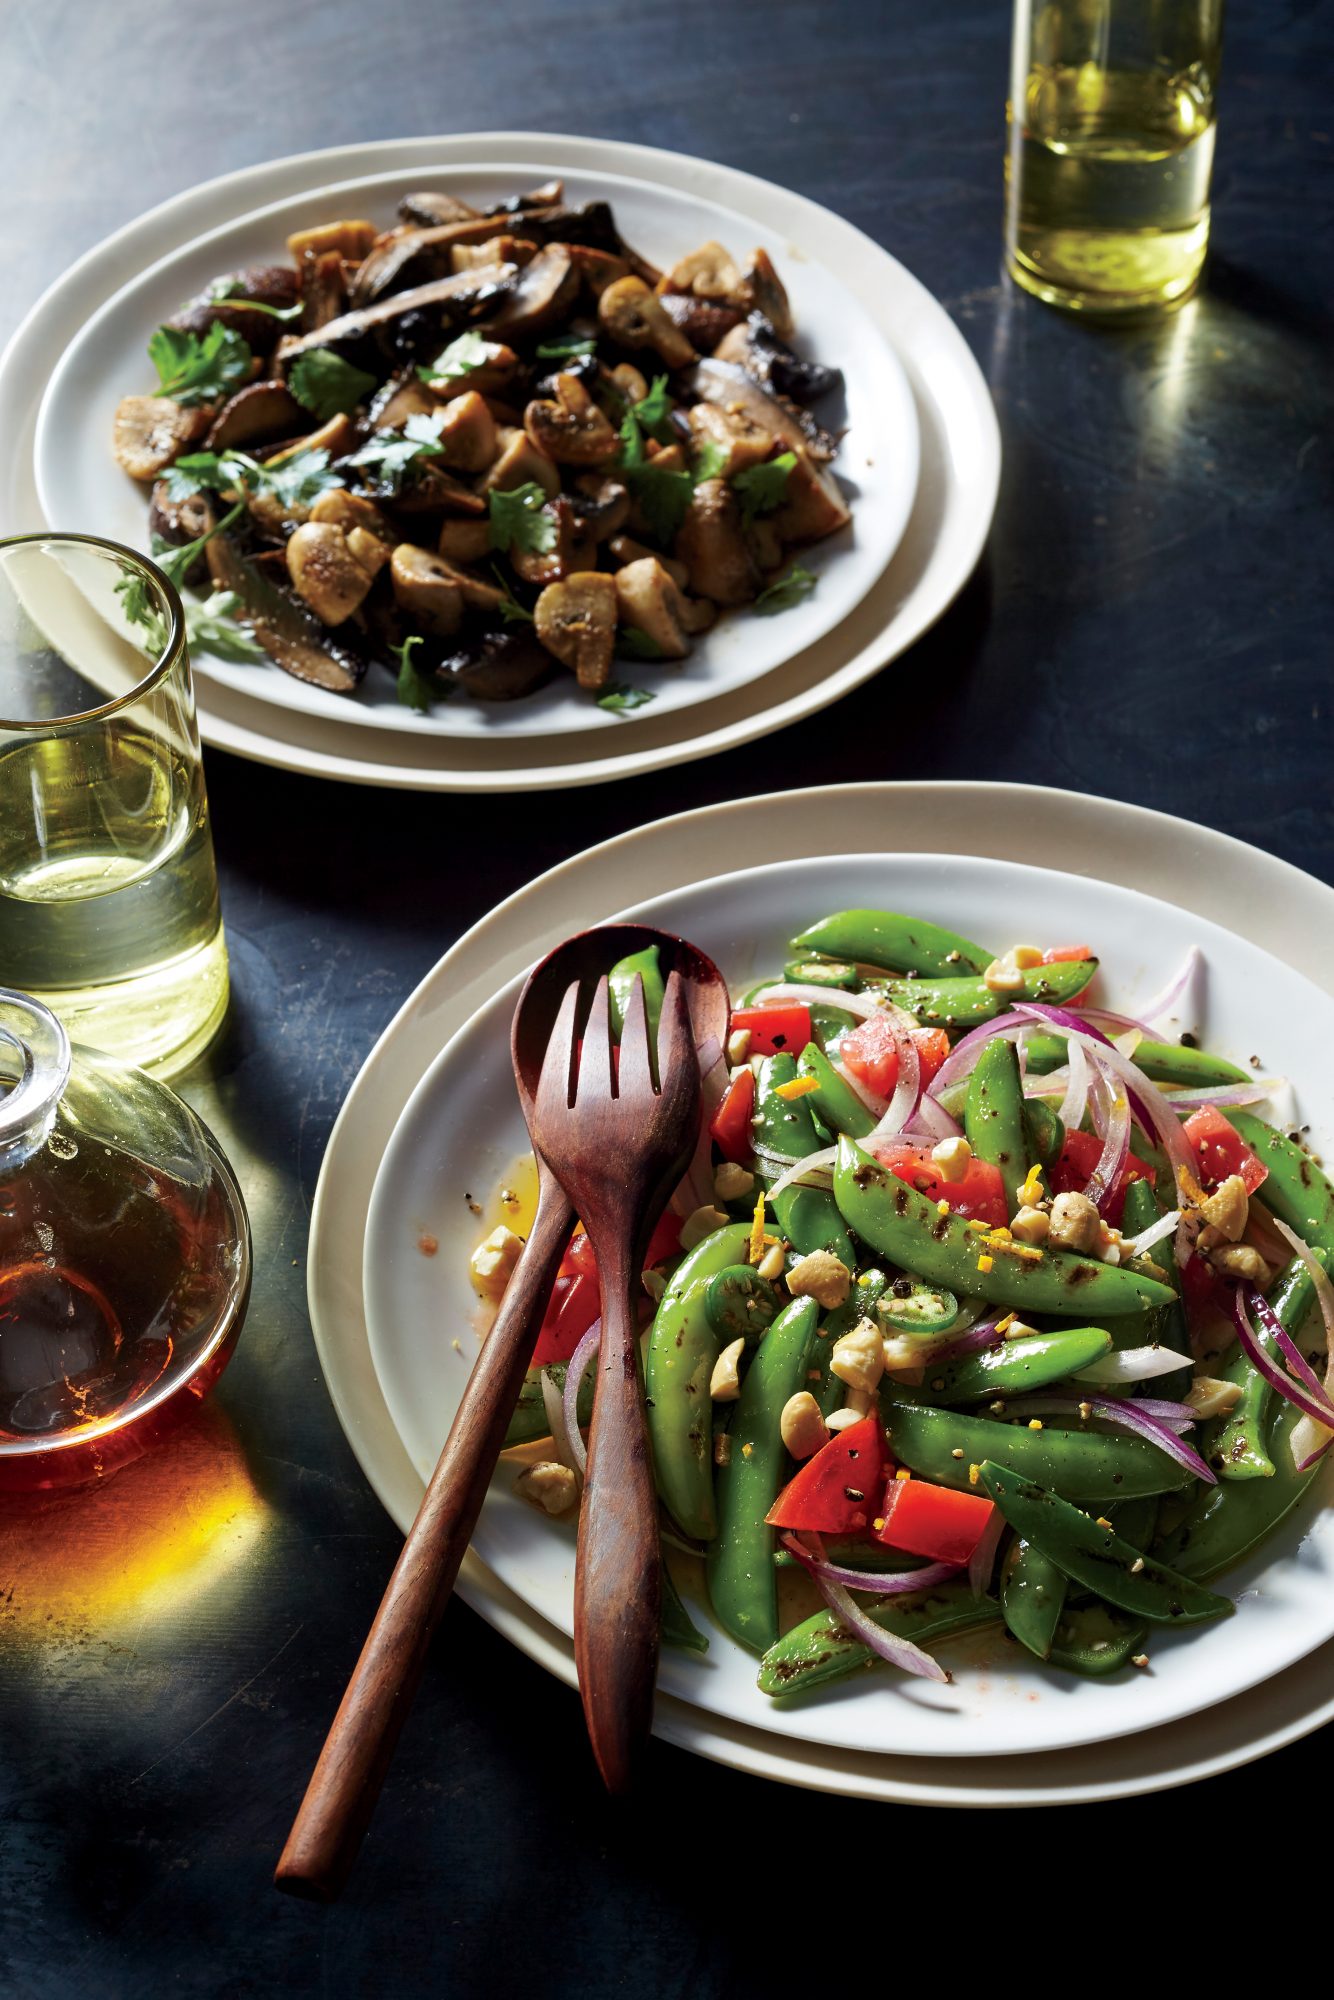 Blistered Snap Peas with Fish Sauce Vinaigrette, Roasted Cashews, and Basil